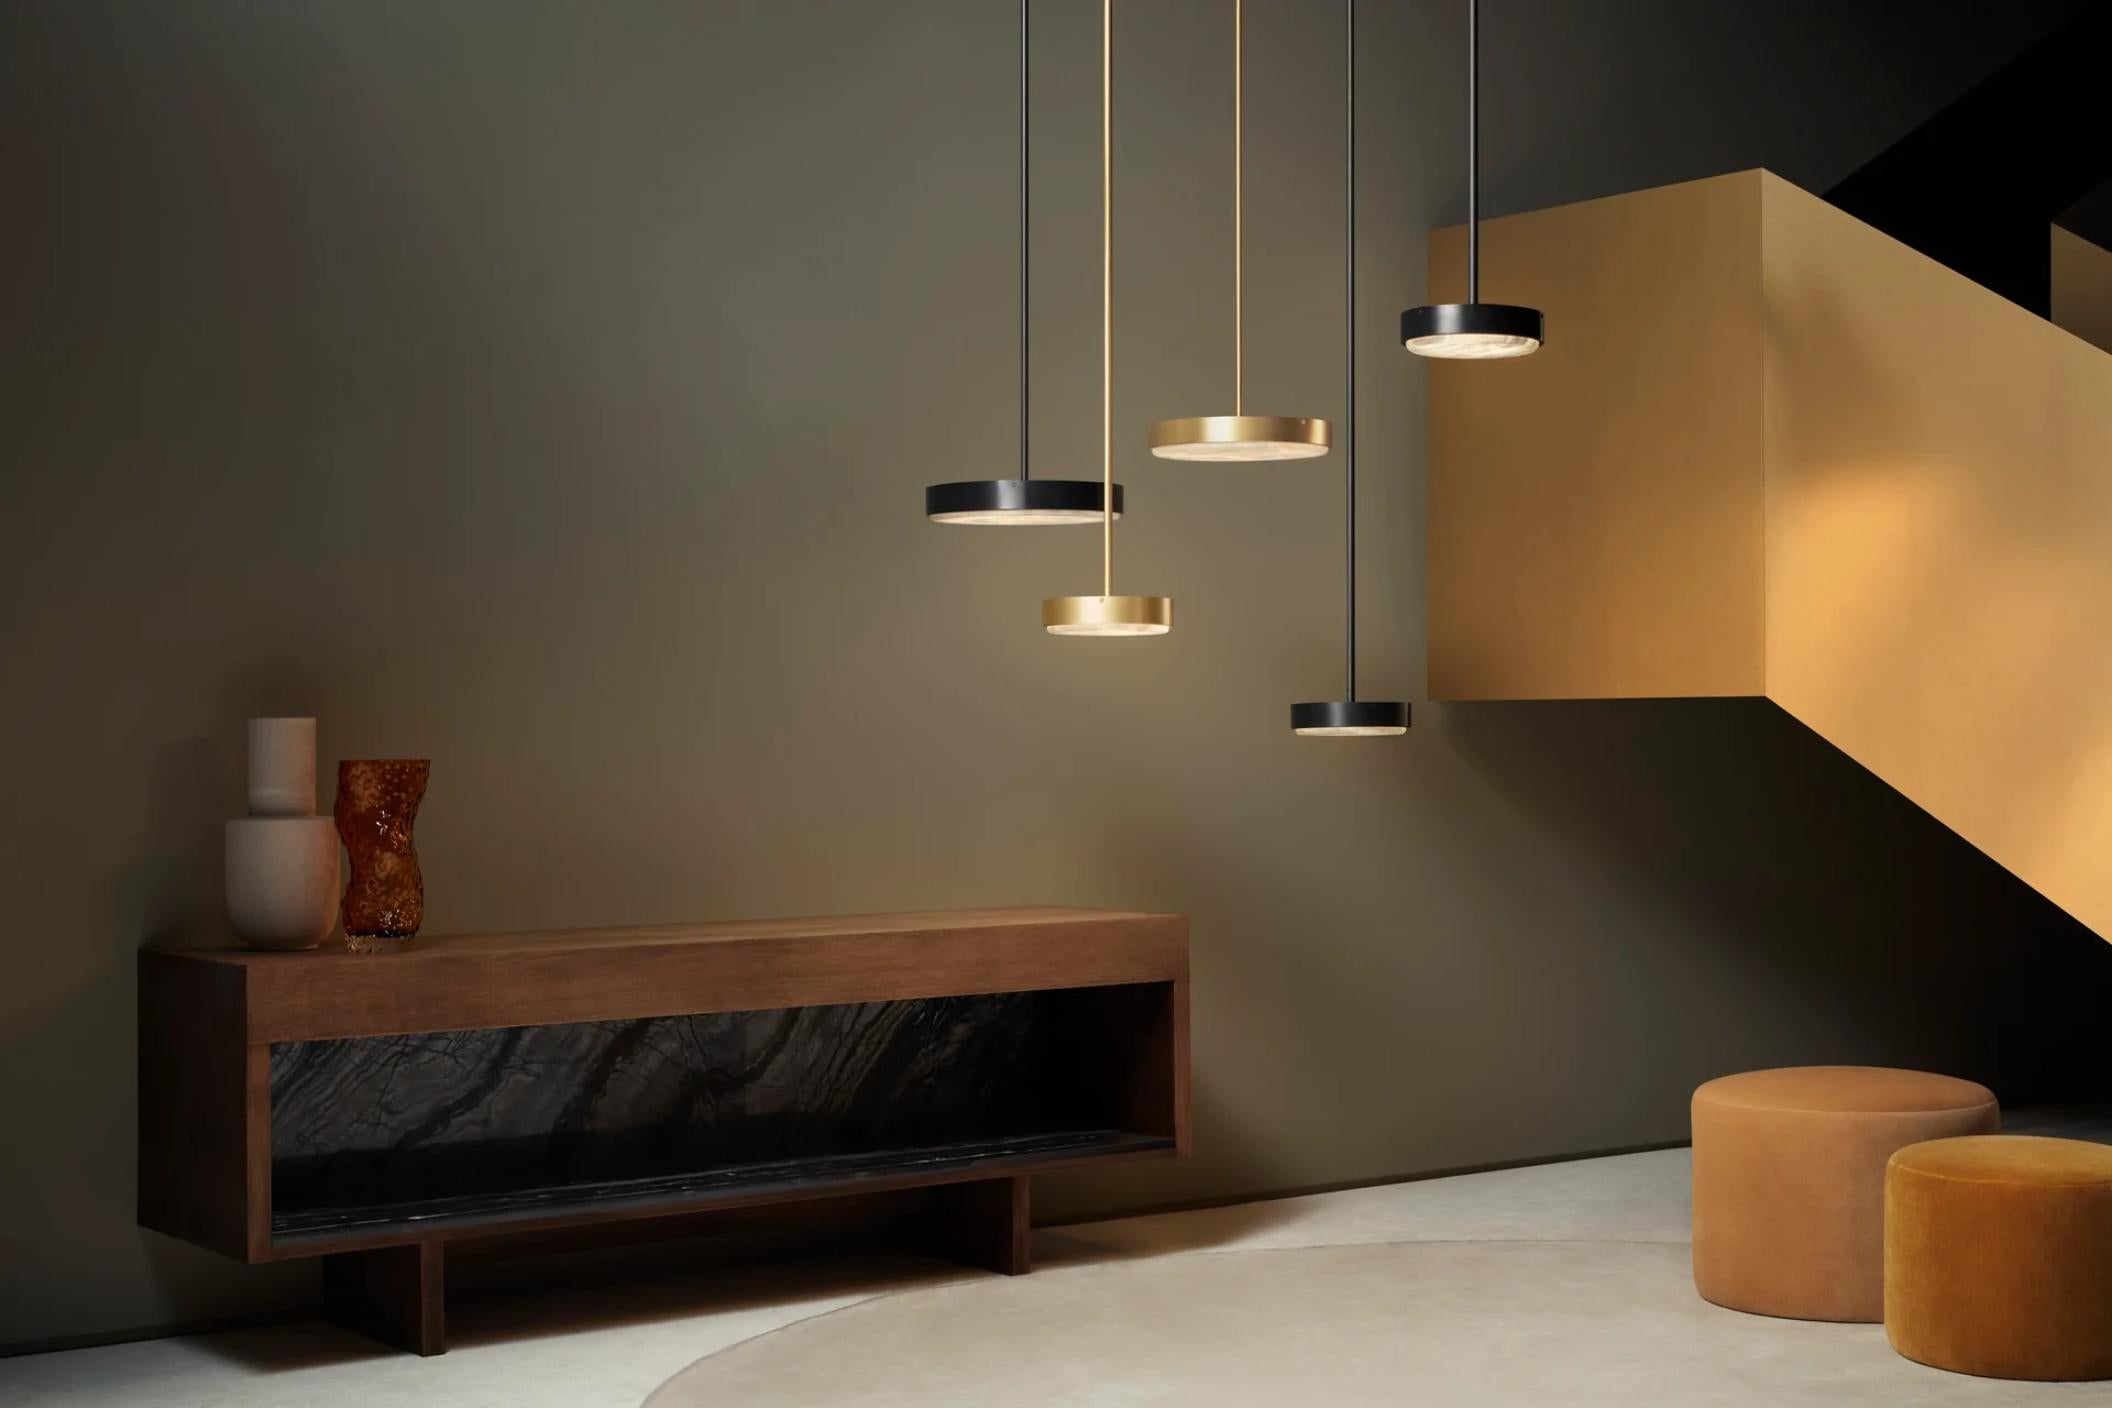 Anvers large pendant by CTO lighting.
Materials: satin brass with alabaster stone
Also available in bronze with alabaster stone
Dimensions: H 6.8 x W 54.5 cm 

All our lamps can be wired according to each country. If sold to the USA it will be wired